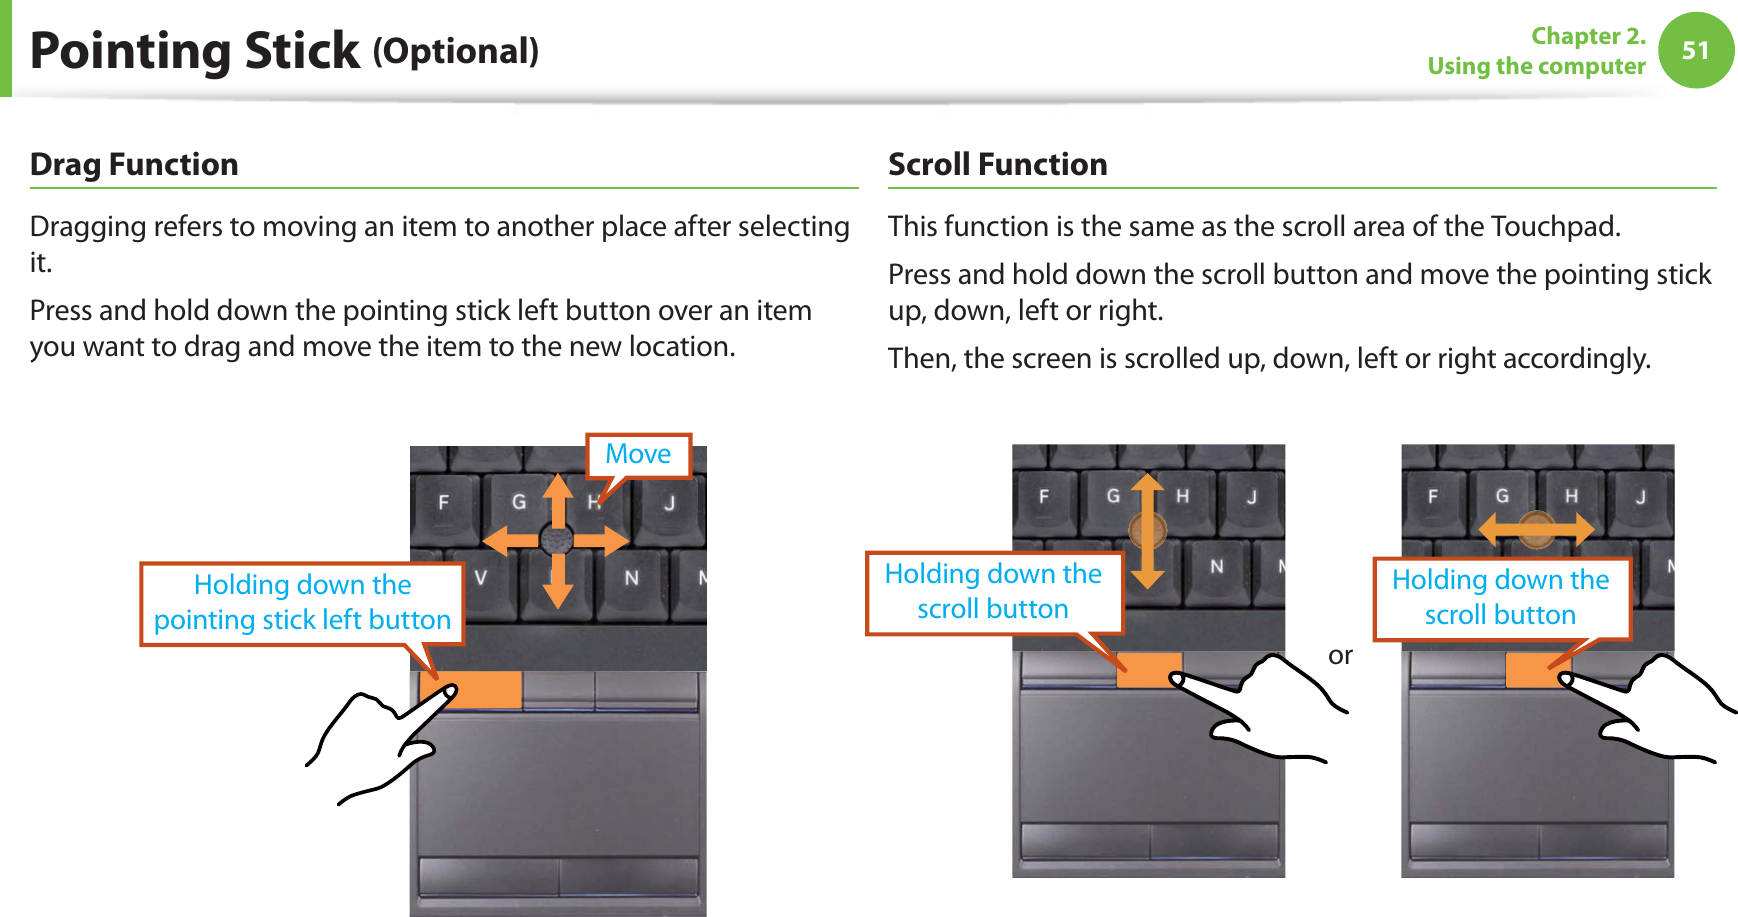 51Chapter 2.  Using the computerDrag FunctionDragging refers to moving an item to another place after selecting it.Press and hold down the pointing stick left button over an item you want to drag and move the item to the new location.Holding down the pointing stick left buttonMoveScroll Function This function is the same as the scroll area of the Touchpad.Press and hold down the scroll button and move the pointing stick up, down, left or right.Then, the screen is scrolled up, down, left or right accordingly.orHolding down the  scroll button Holding down the  scroll buttonPointing Stick (Optional)